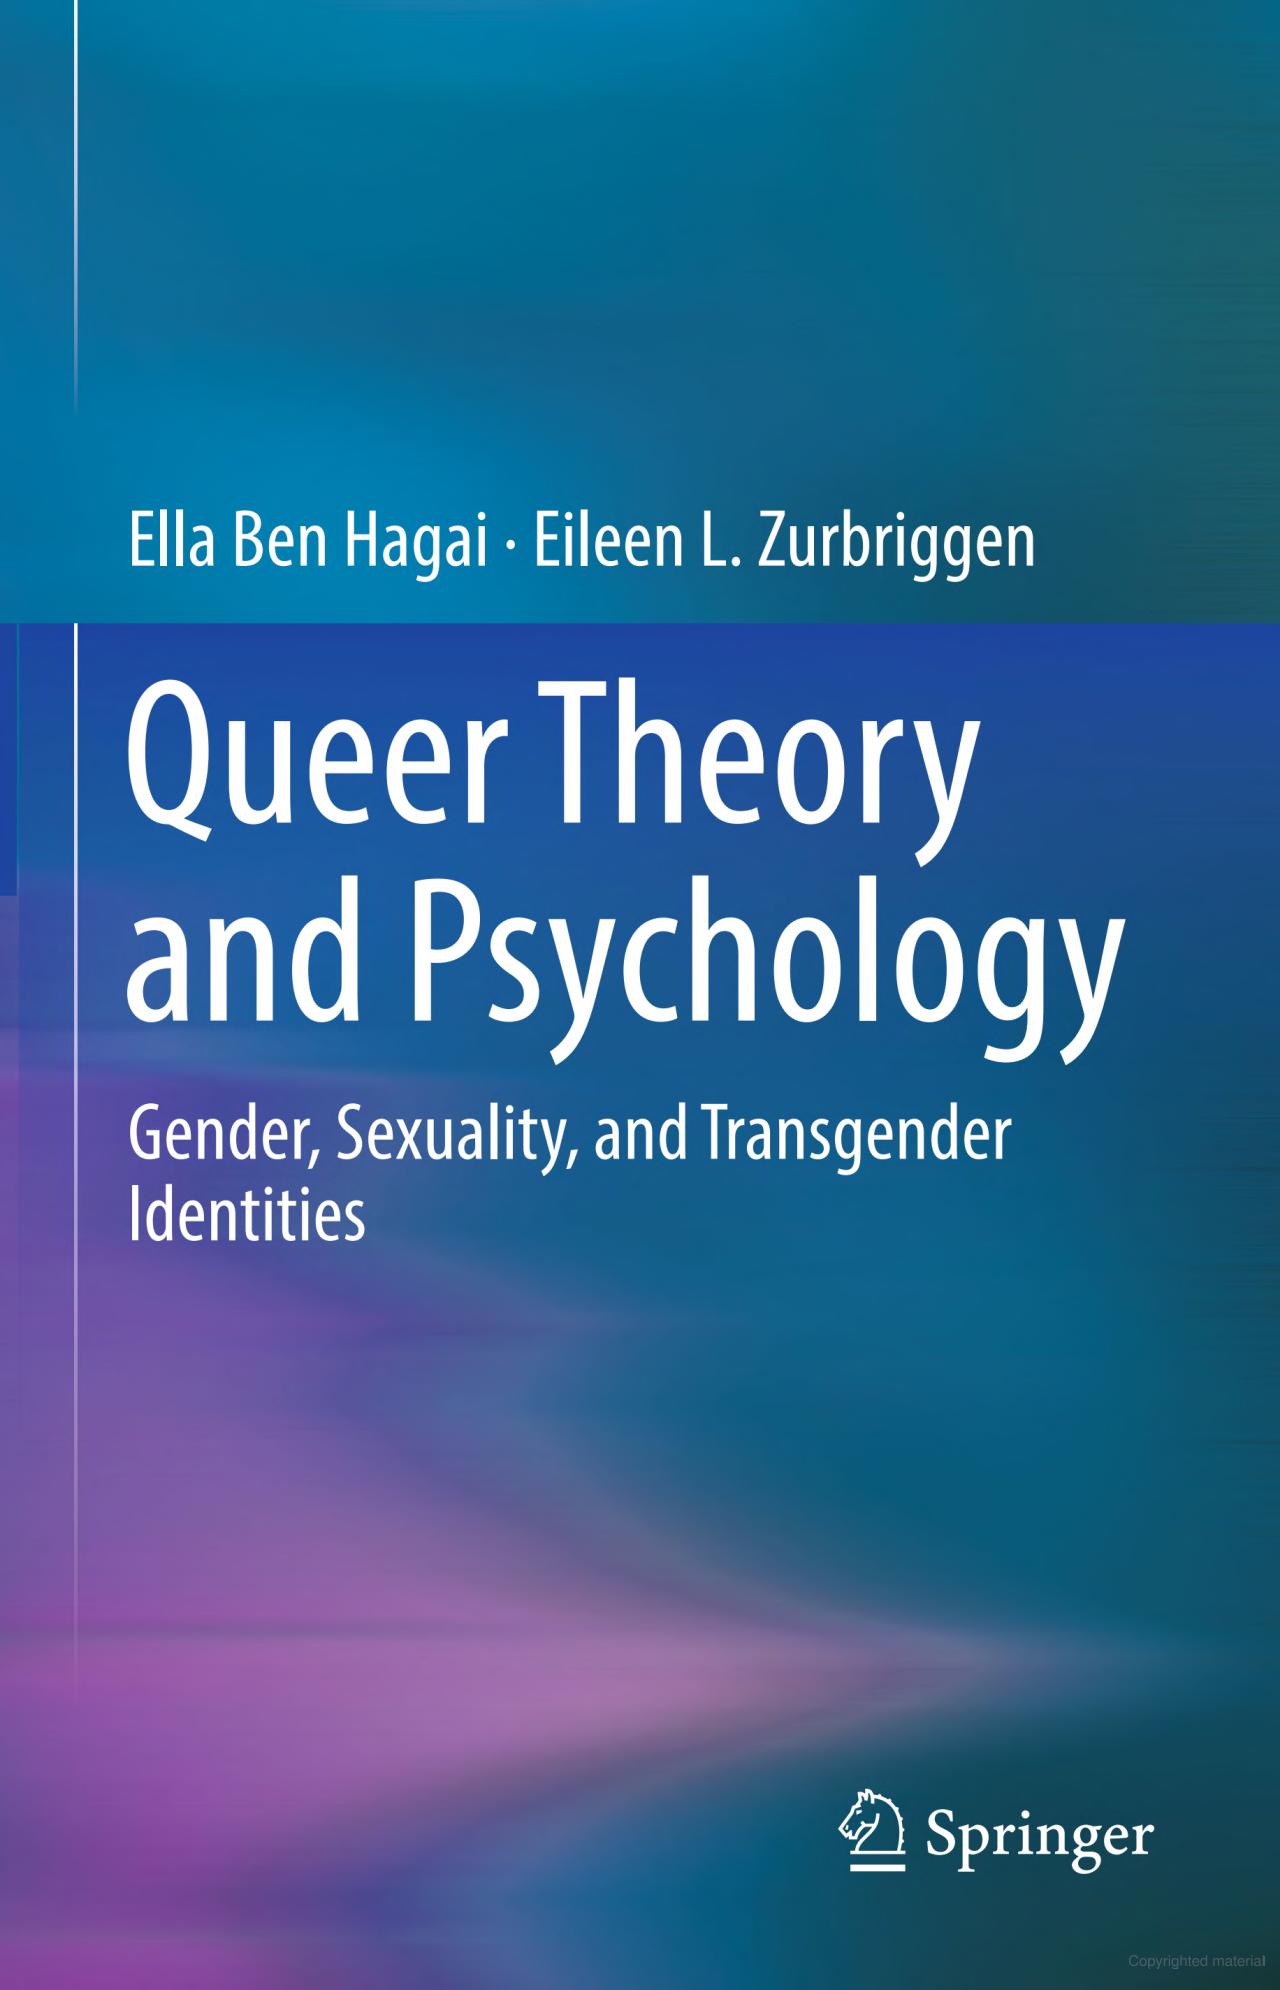 The book cover for Queer Theory and Psychology: Gender, Sexuality, and Transgender Identities